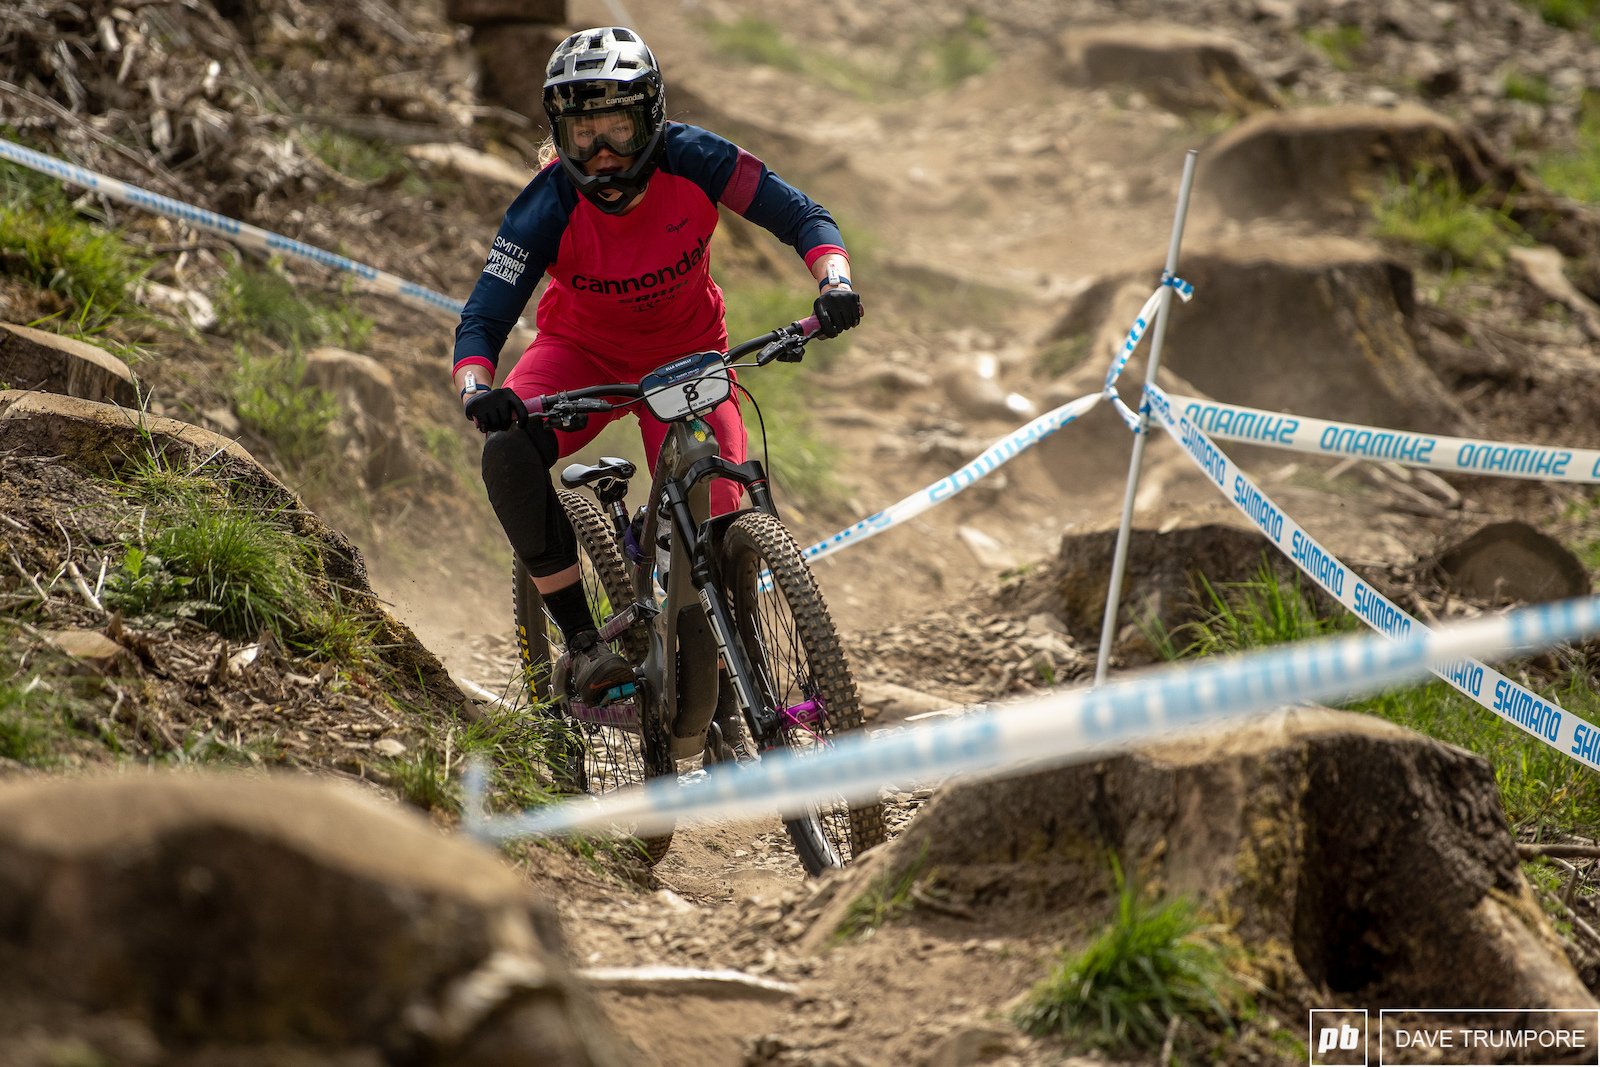 Ella Conolly finally backed up her podium showing from a few years back to take her first ever EWS win and the overall series lead to go wit it.